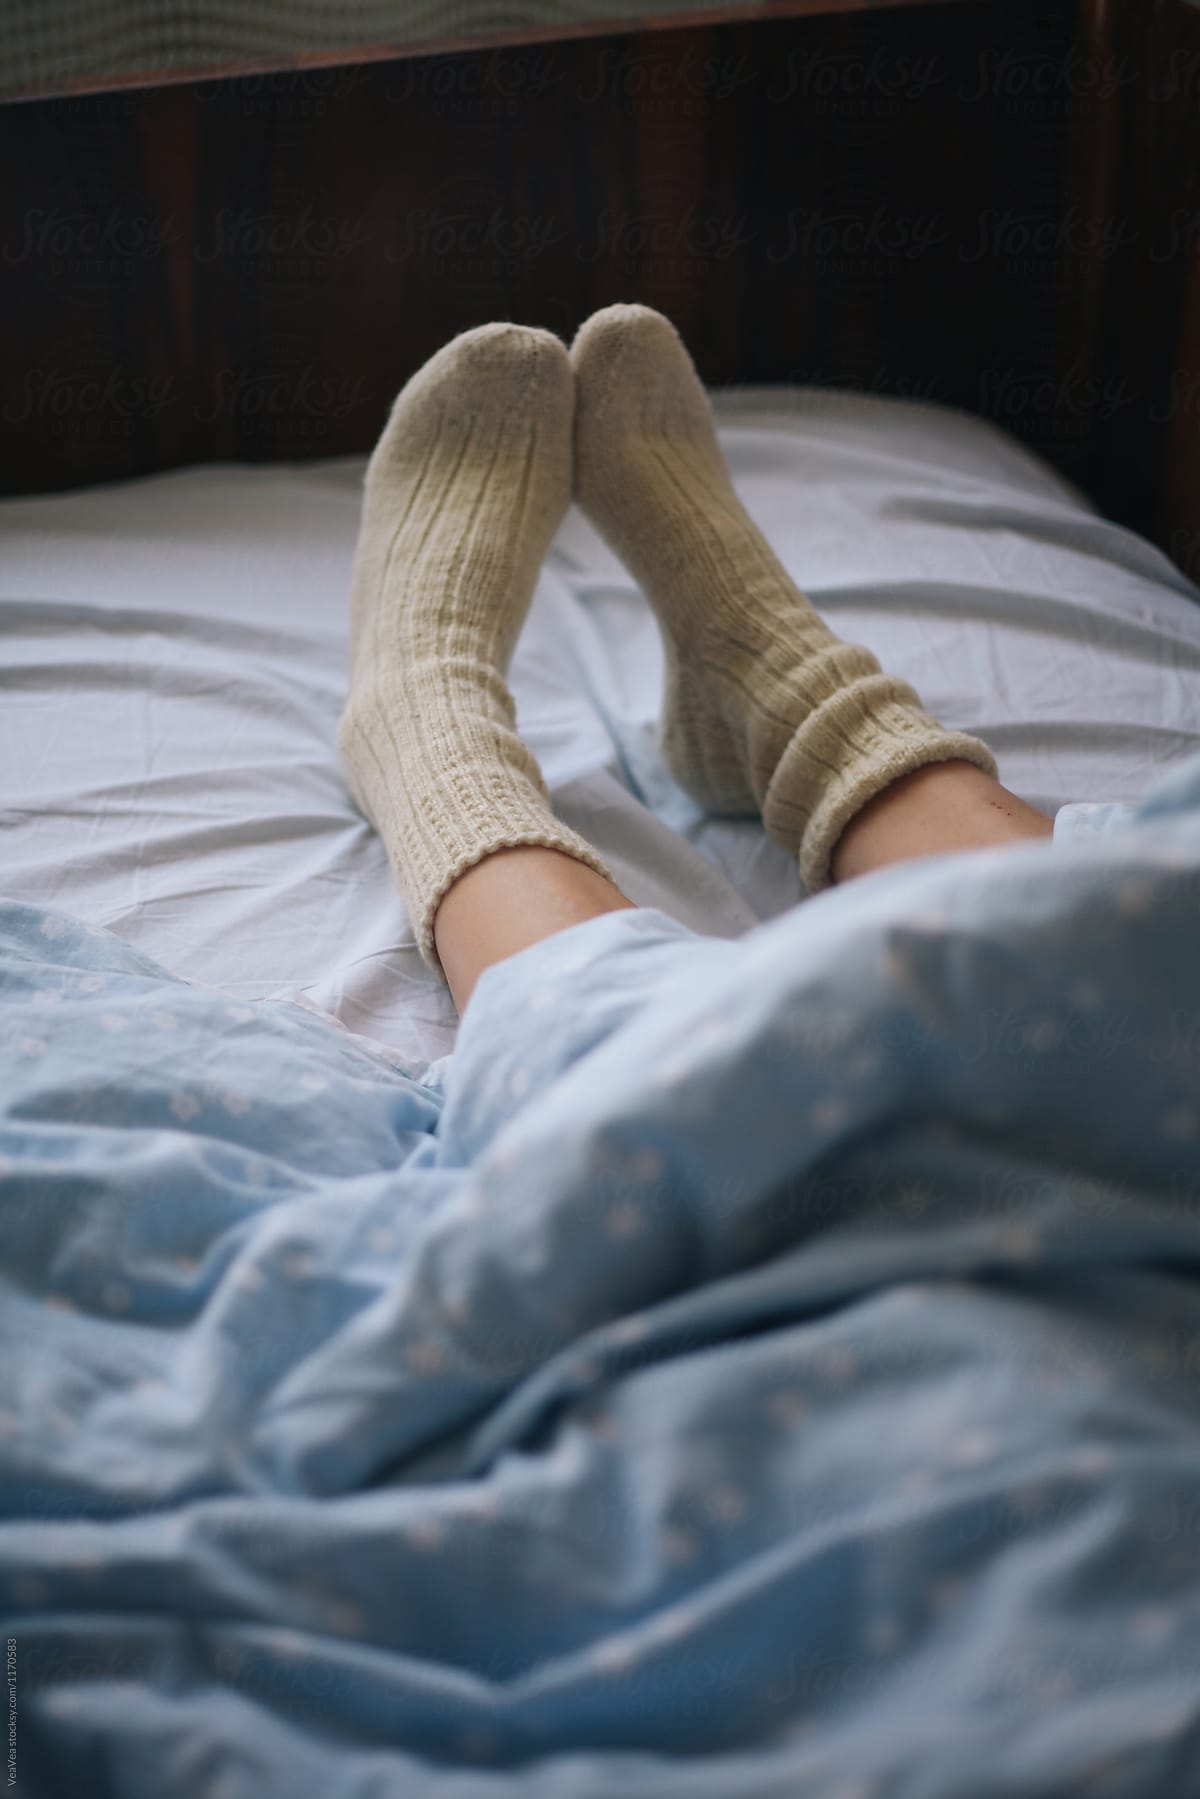 Female legs in cosy winter socks under the sheet - Stock Image - Everypixel